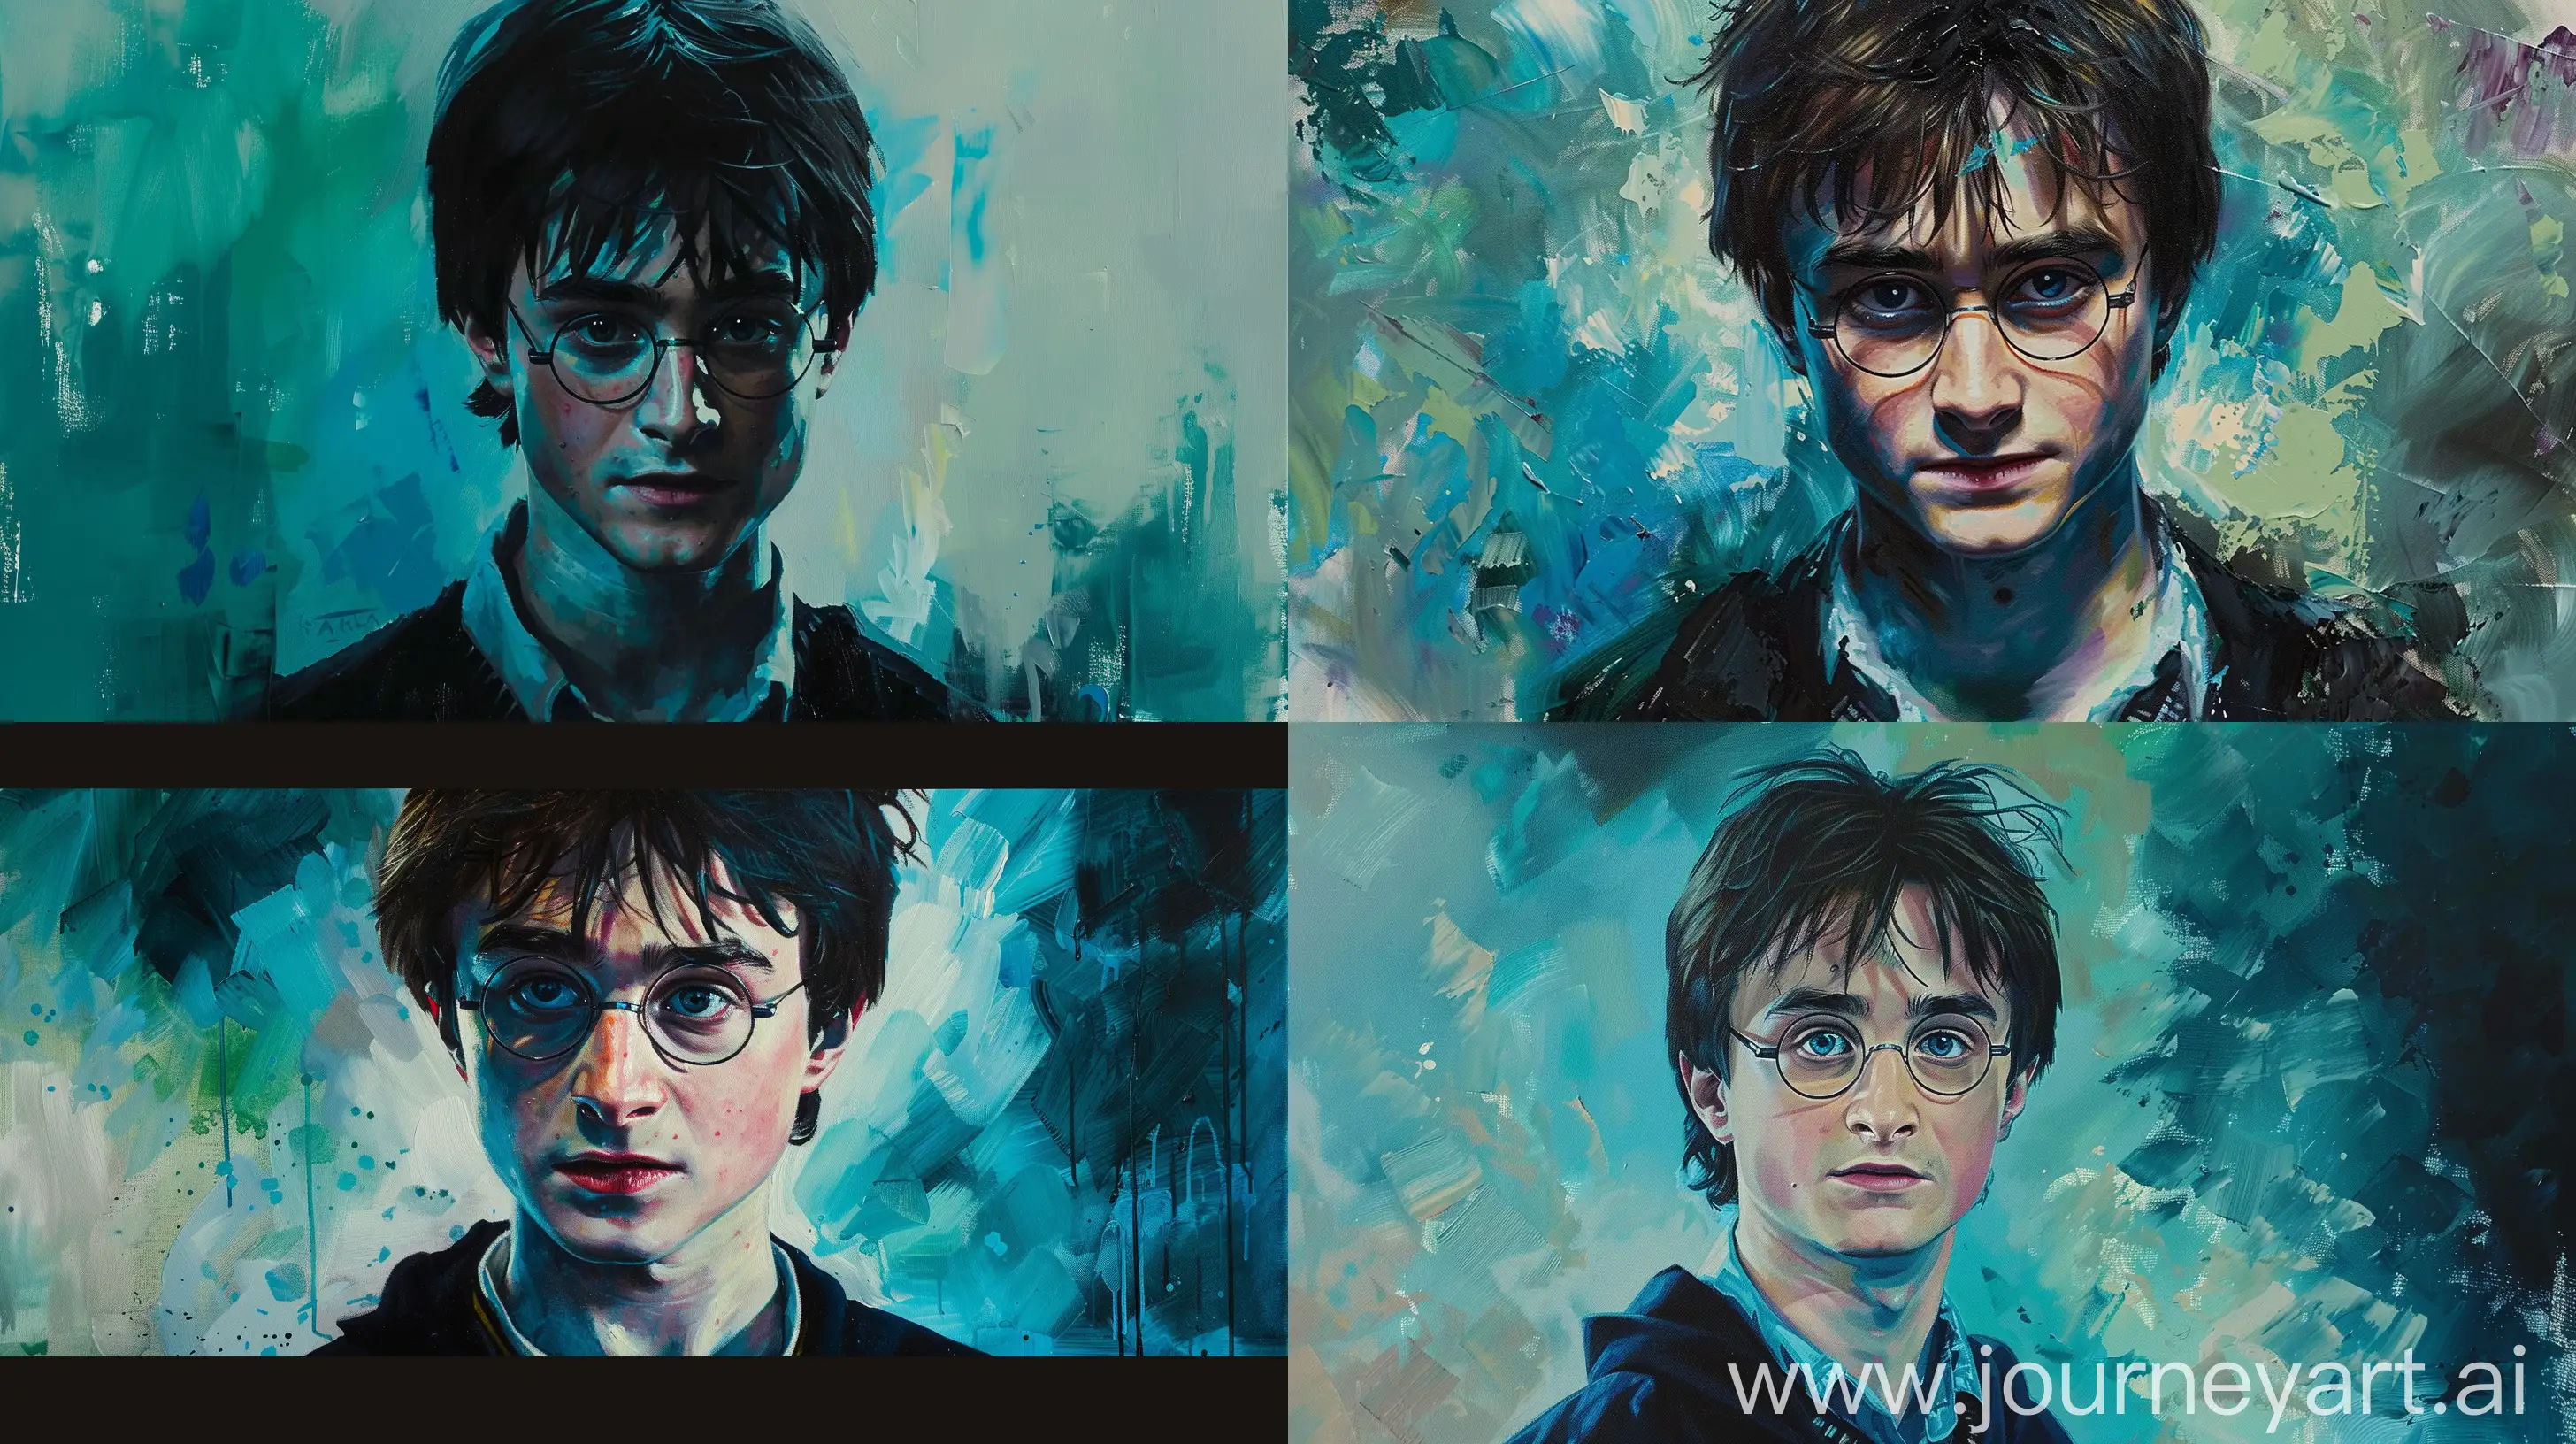 Magical-Portrait-of-Harry-Potter-in-Vibrant-Blues-and-Greens